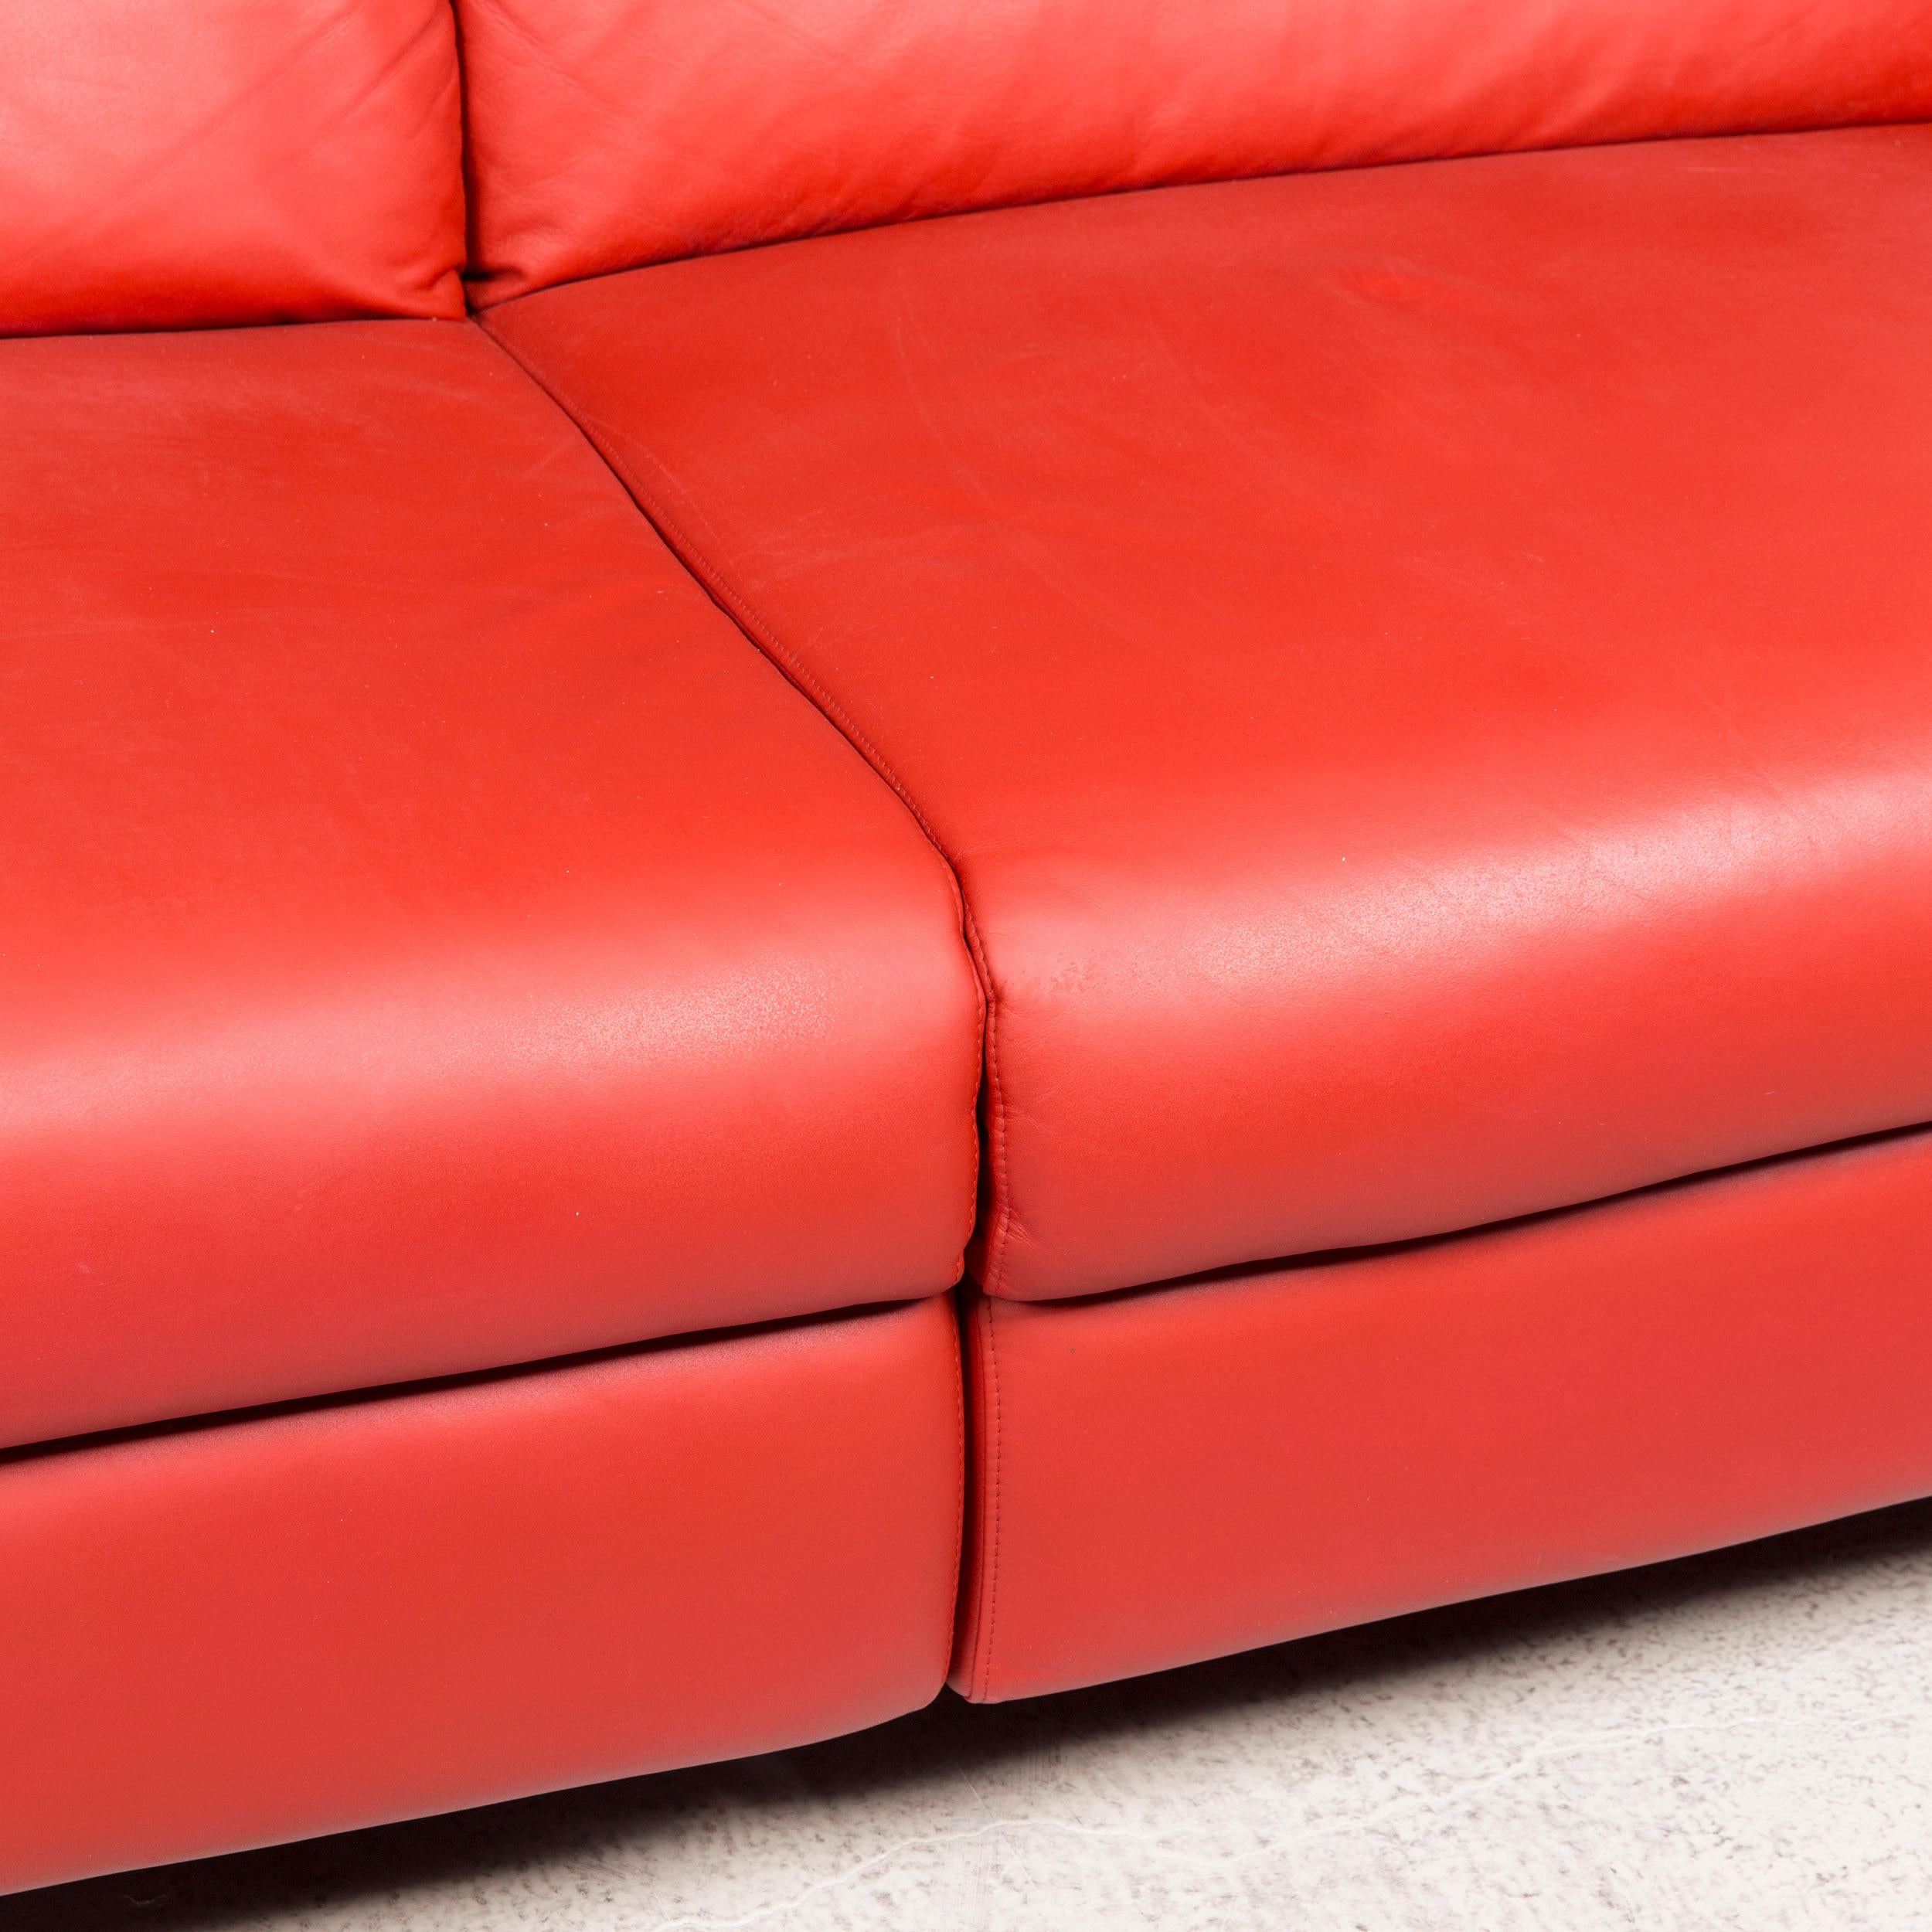 Willi Schillig Siena Designer Leather Sofa Red Real Leather Dreisityer Couch In Good Condition For Sale In Cologne, DE